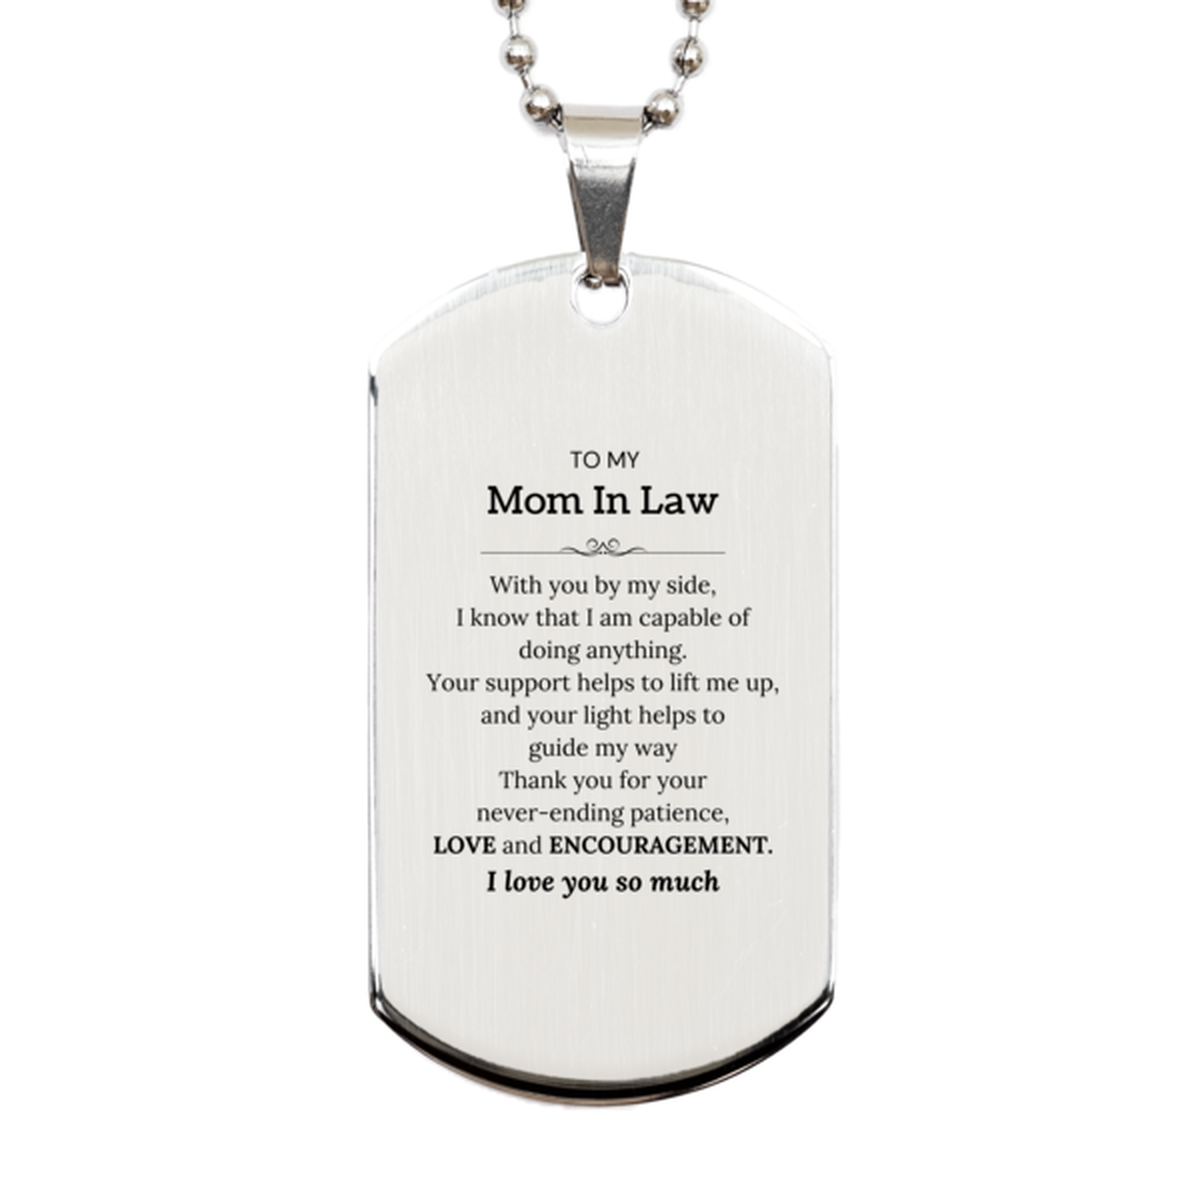 Appreciation Mom In Law Silver Dog Tag Gifts, To My Mom In Law Birthday Christmas Wedding Keepsake Gifts for Mom In Law With you by my side, I know that I am capable of doing anything. I love you so much